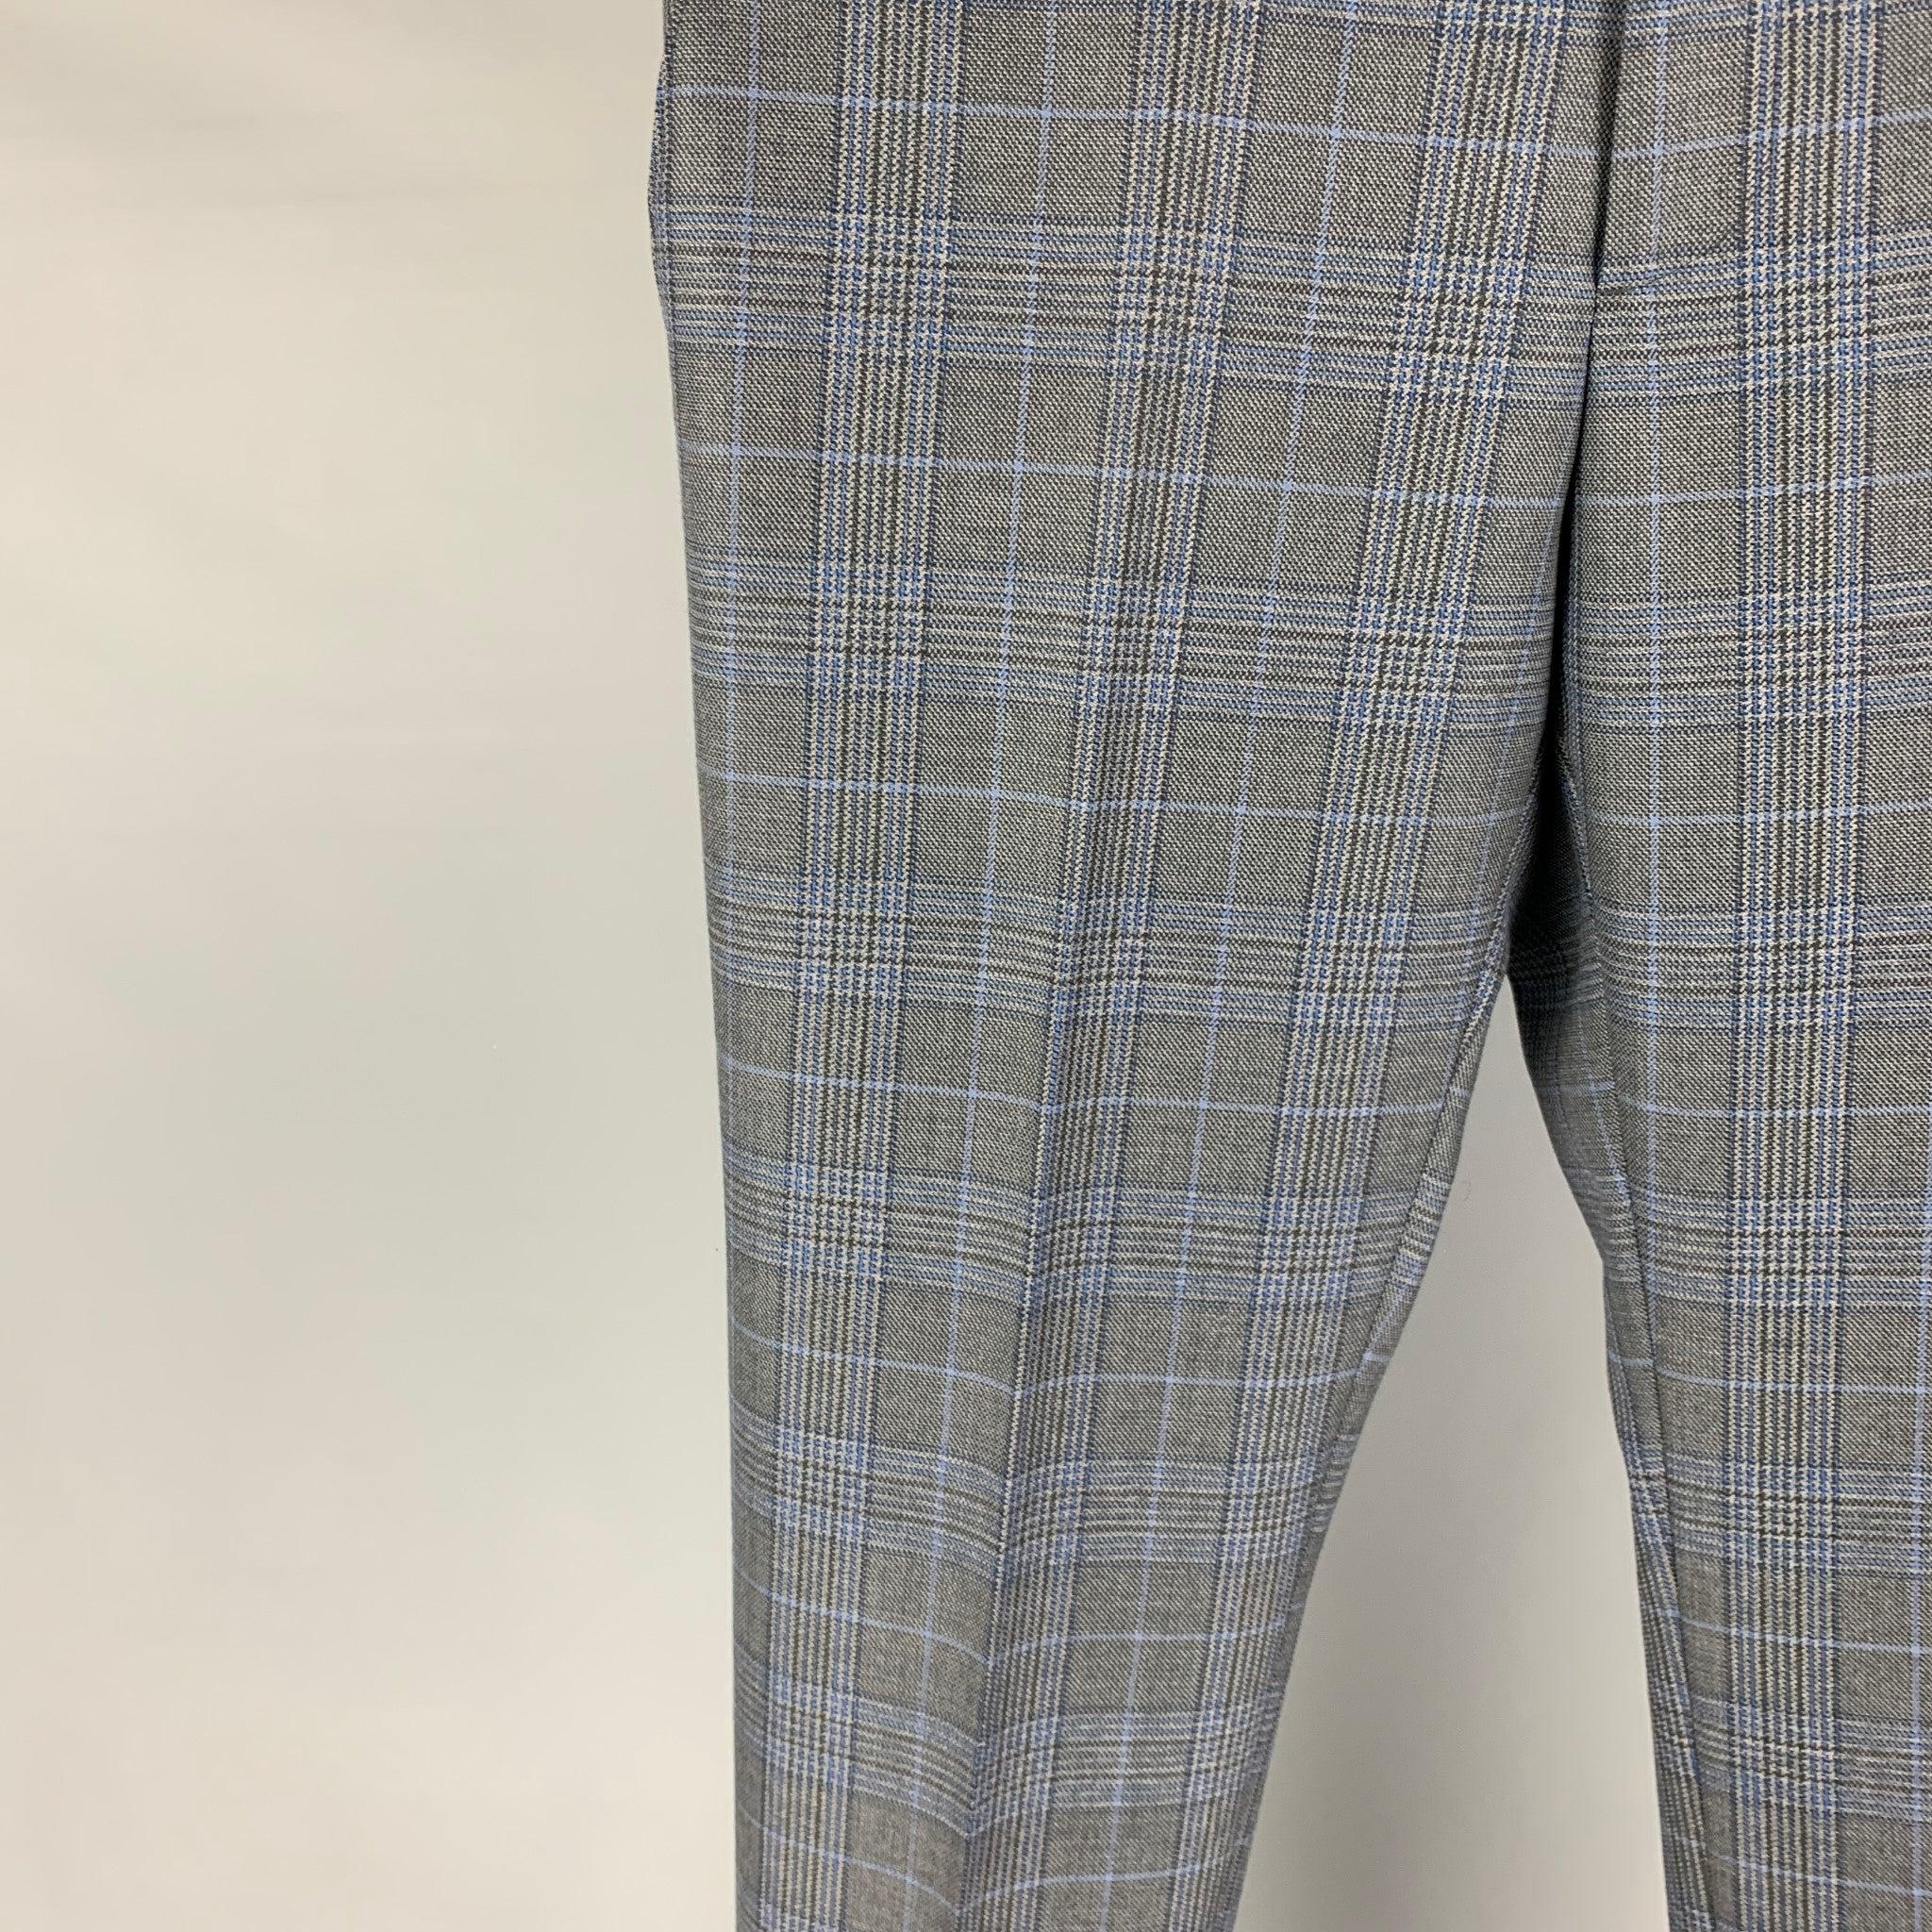 ETRO dress pants comes in a grey & blue plaid wool featuring a flat front, slim fit, and a zip fly closure. Made in Italy.
Excellent
Pre-Owned Condition. 

Marked:   48 

Measurements: 
  Waist: 32 inches Rise: 10 inches Inseam: 34 inches Leg